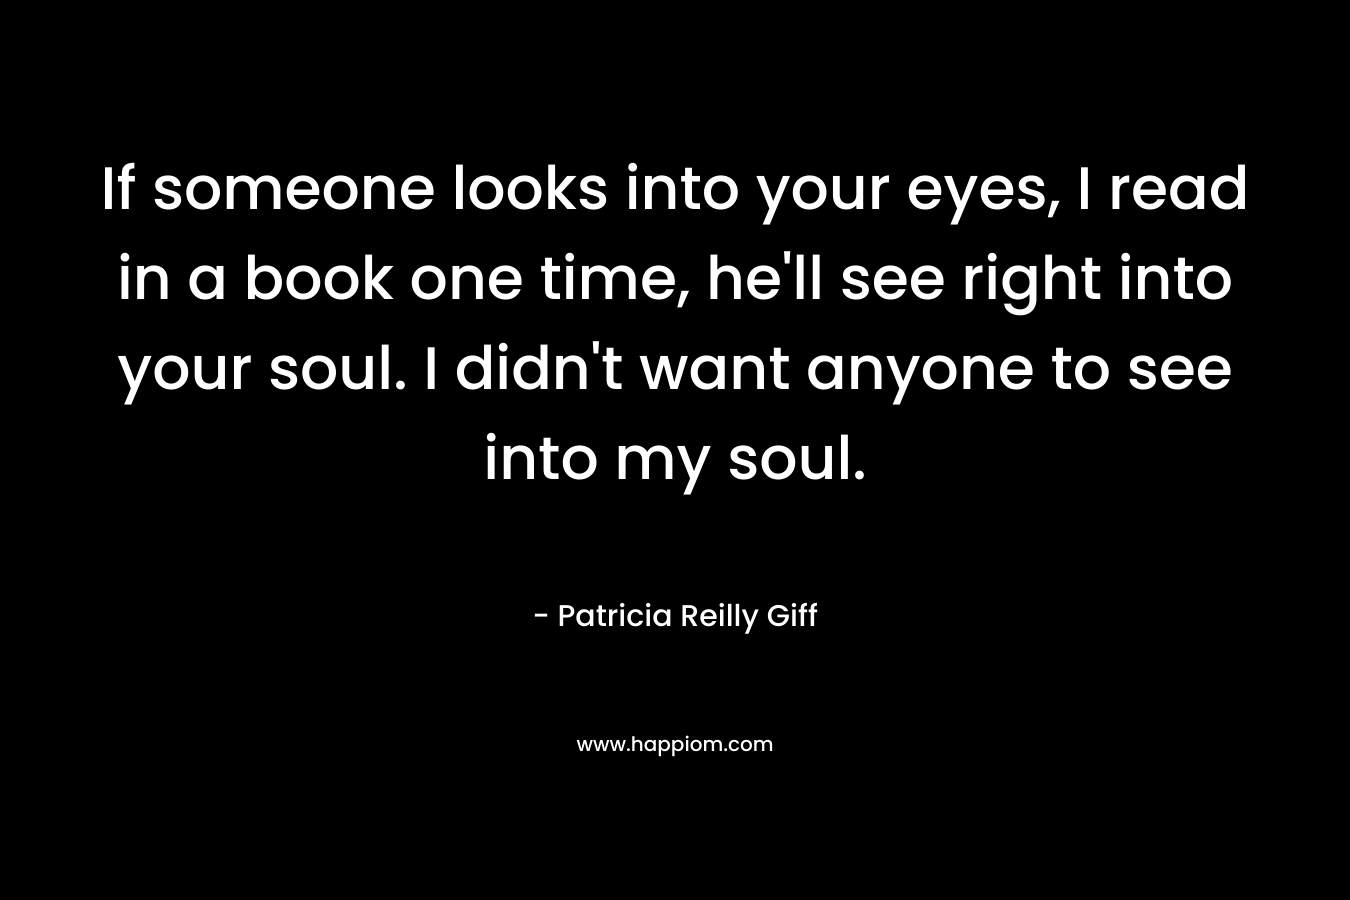 If someone looks into your eyes, I read in a book one time, he'll see right into your soul. I didn't want anyone to see into my soul.